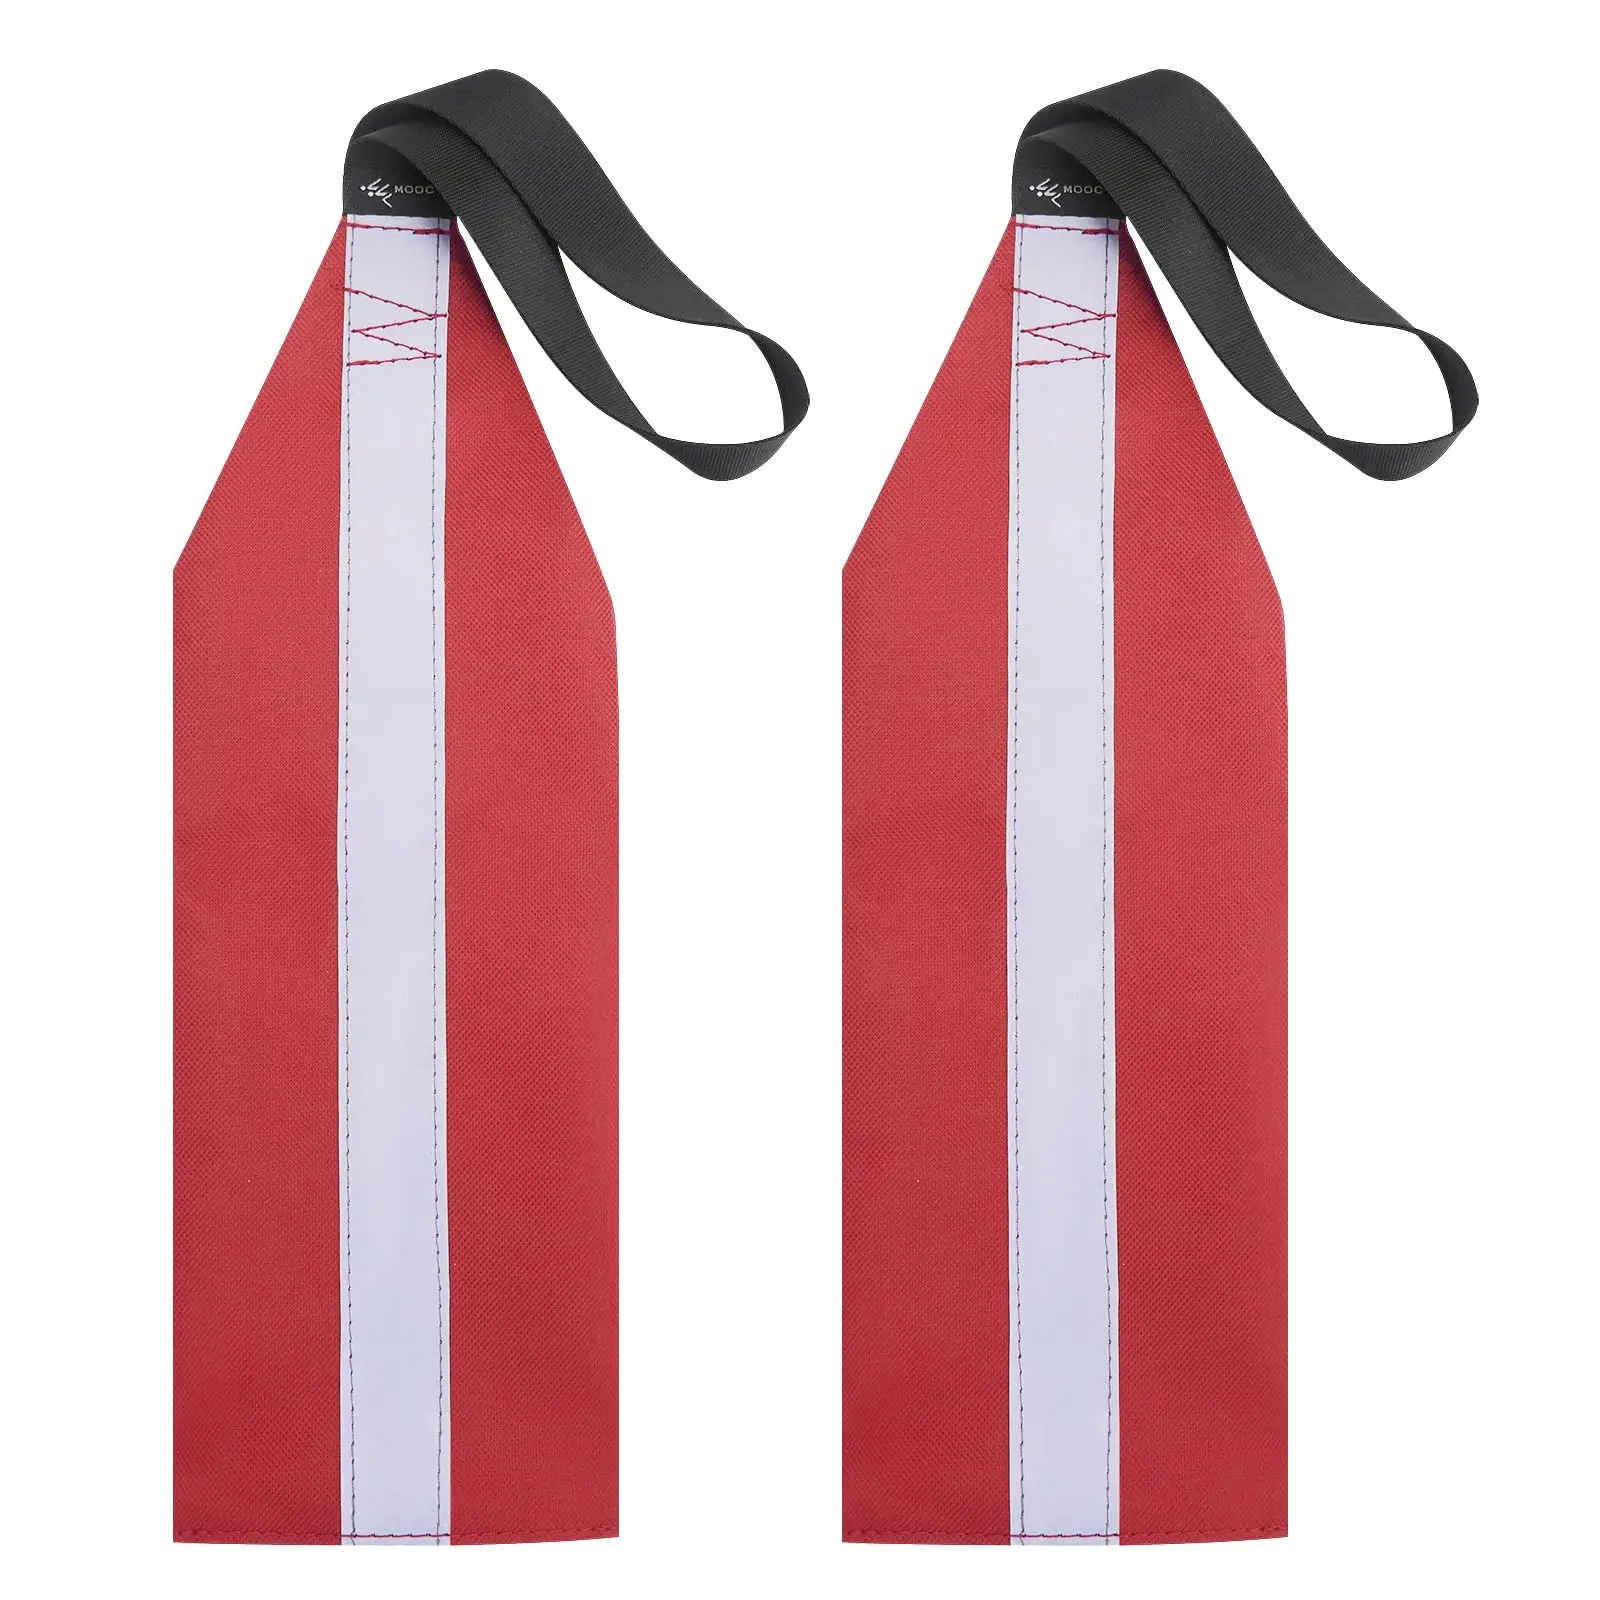 red flag truck loads pack of 2 warning flags for kayak safety towing travel trailer tow accessories Red Flag Truck Loads (Pack of 2), Warning Flags for Kayak Safety Towing,Travel Trailer Tow Accessories